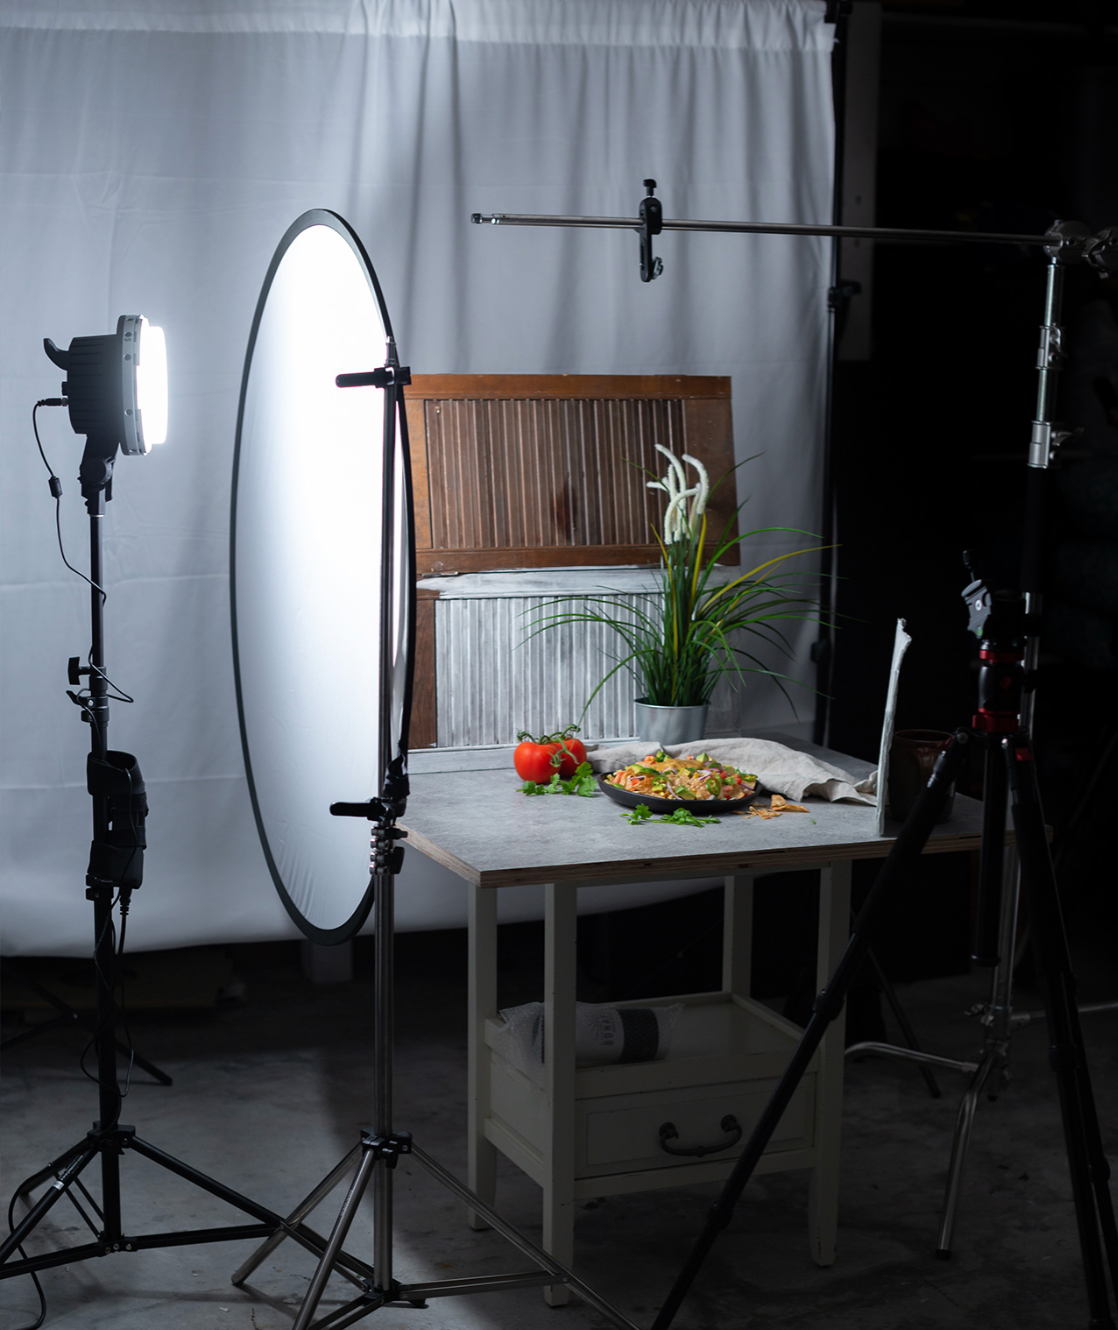 westcott solix light in use for food photography